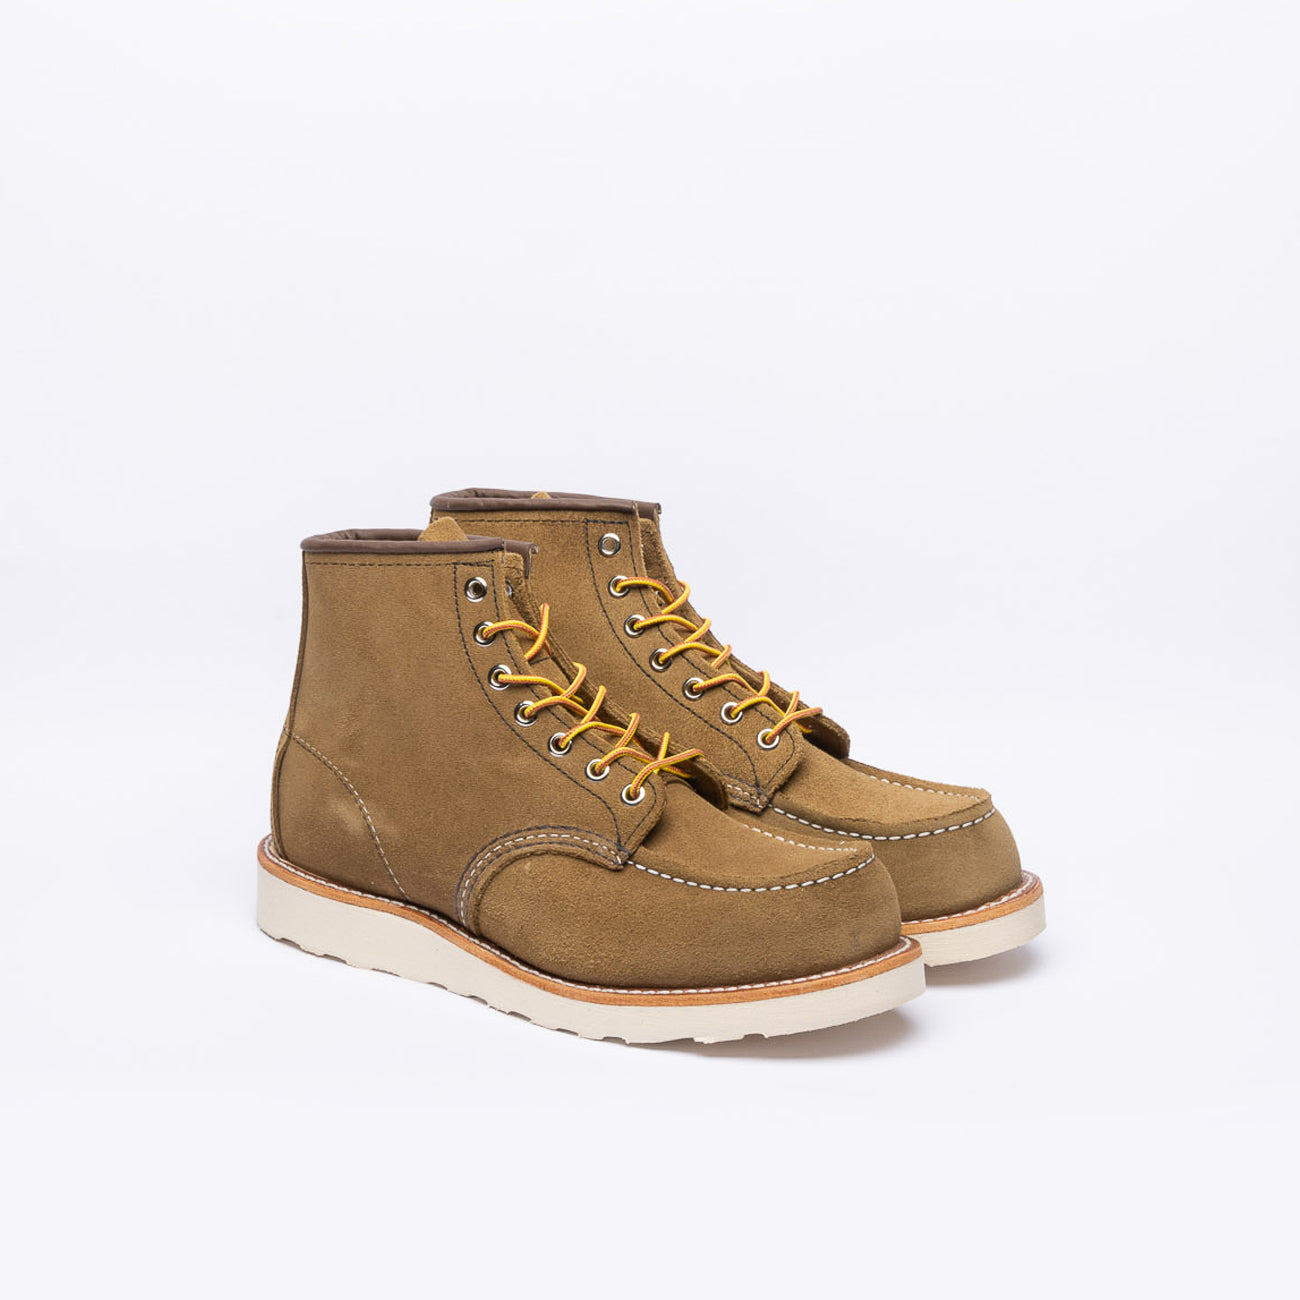 Stivale derby Red Wing 8881 in camoscio beige